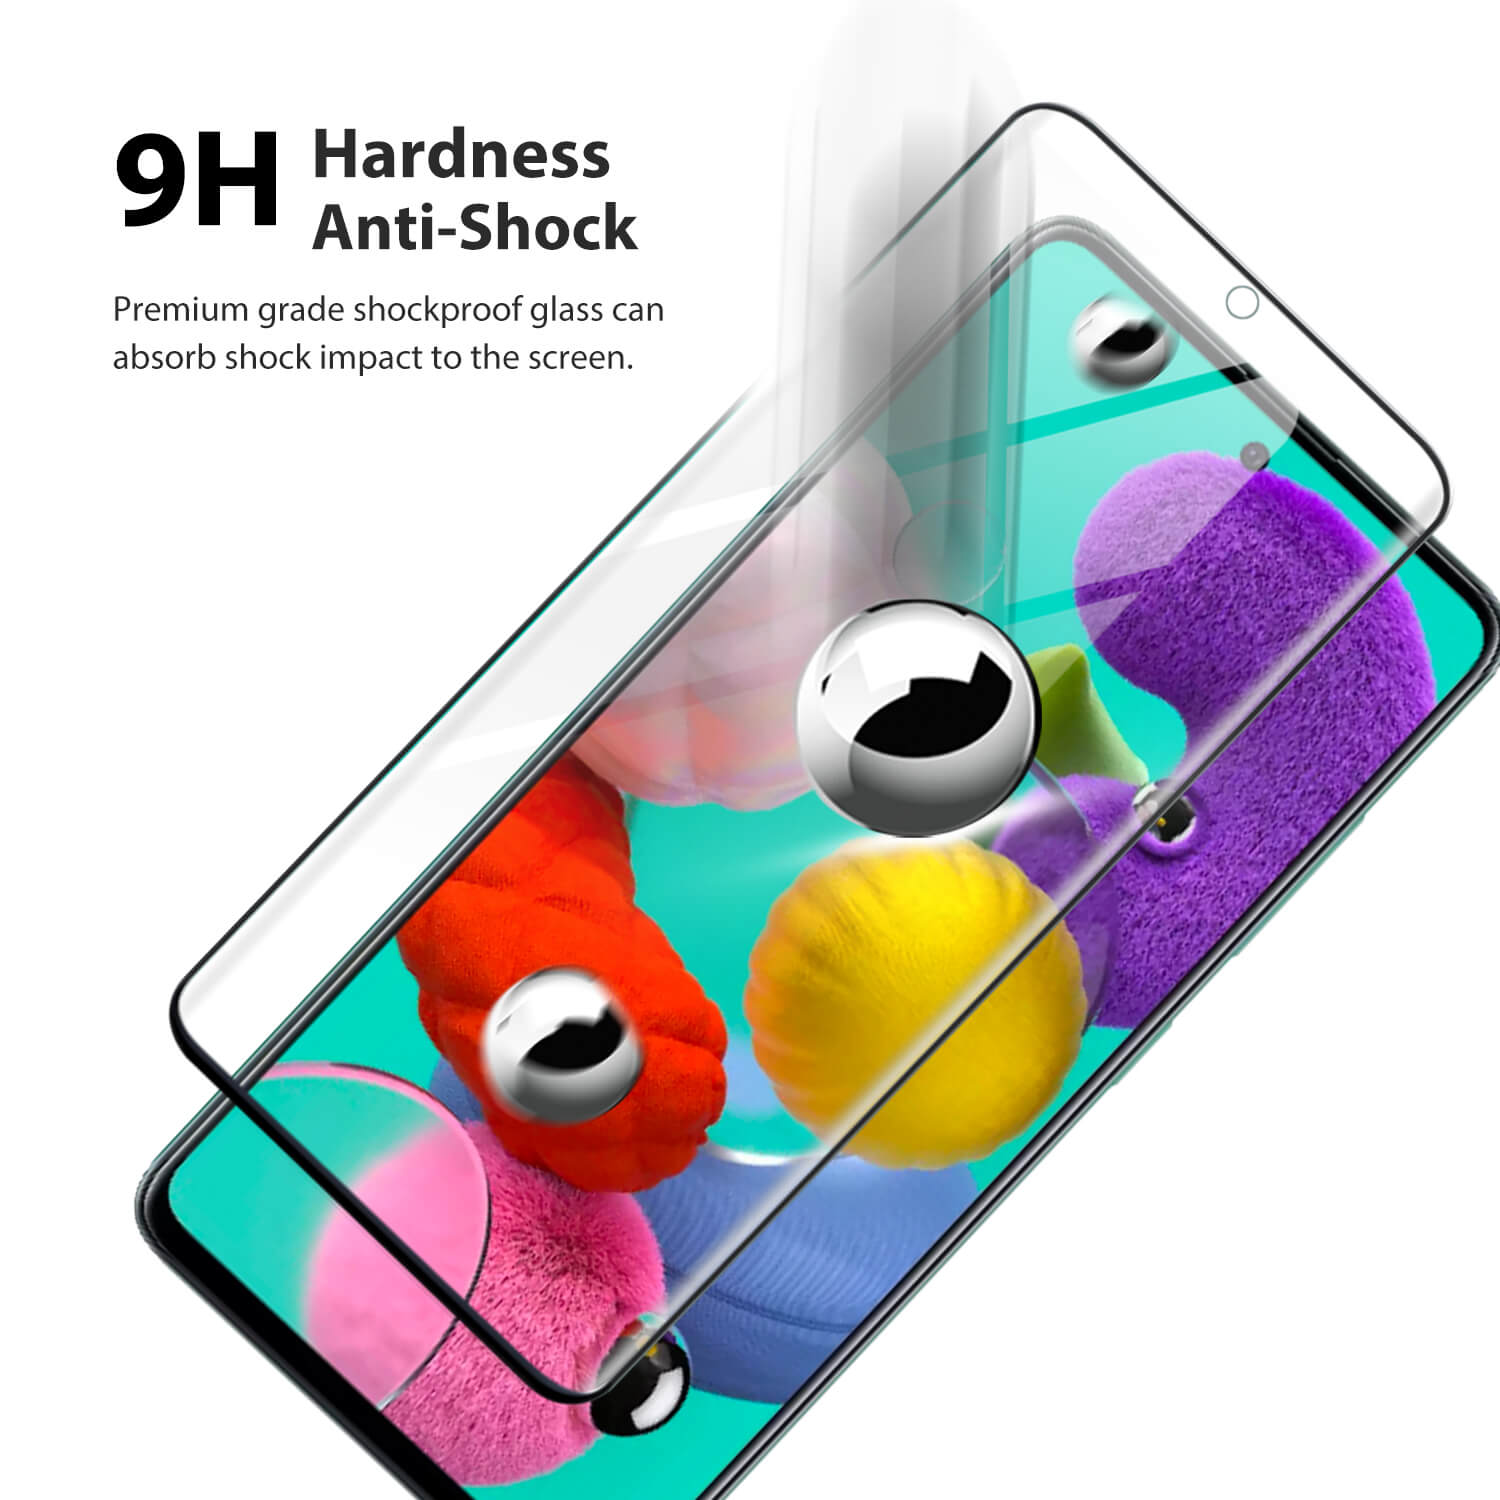 Tough on Samsung Galaxy A53 / A52s /A52 Tempered Glass Screen Protector Black